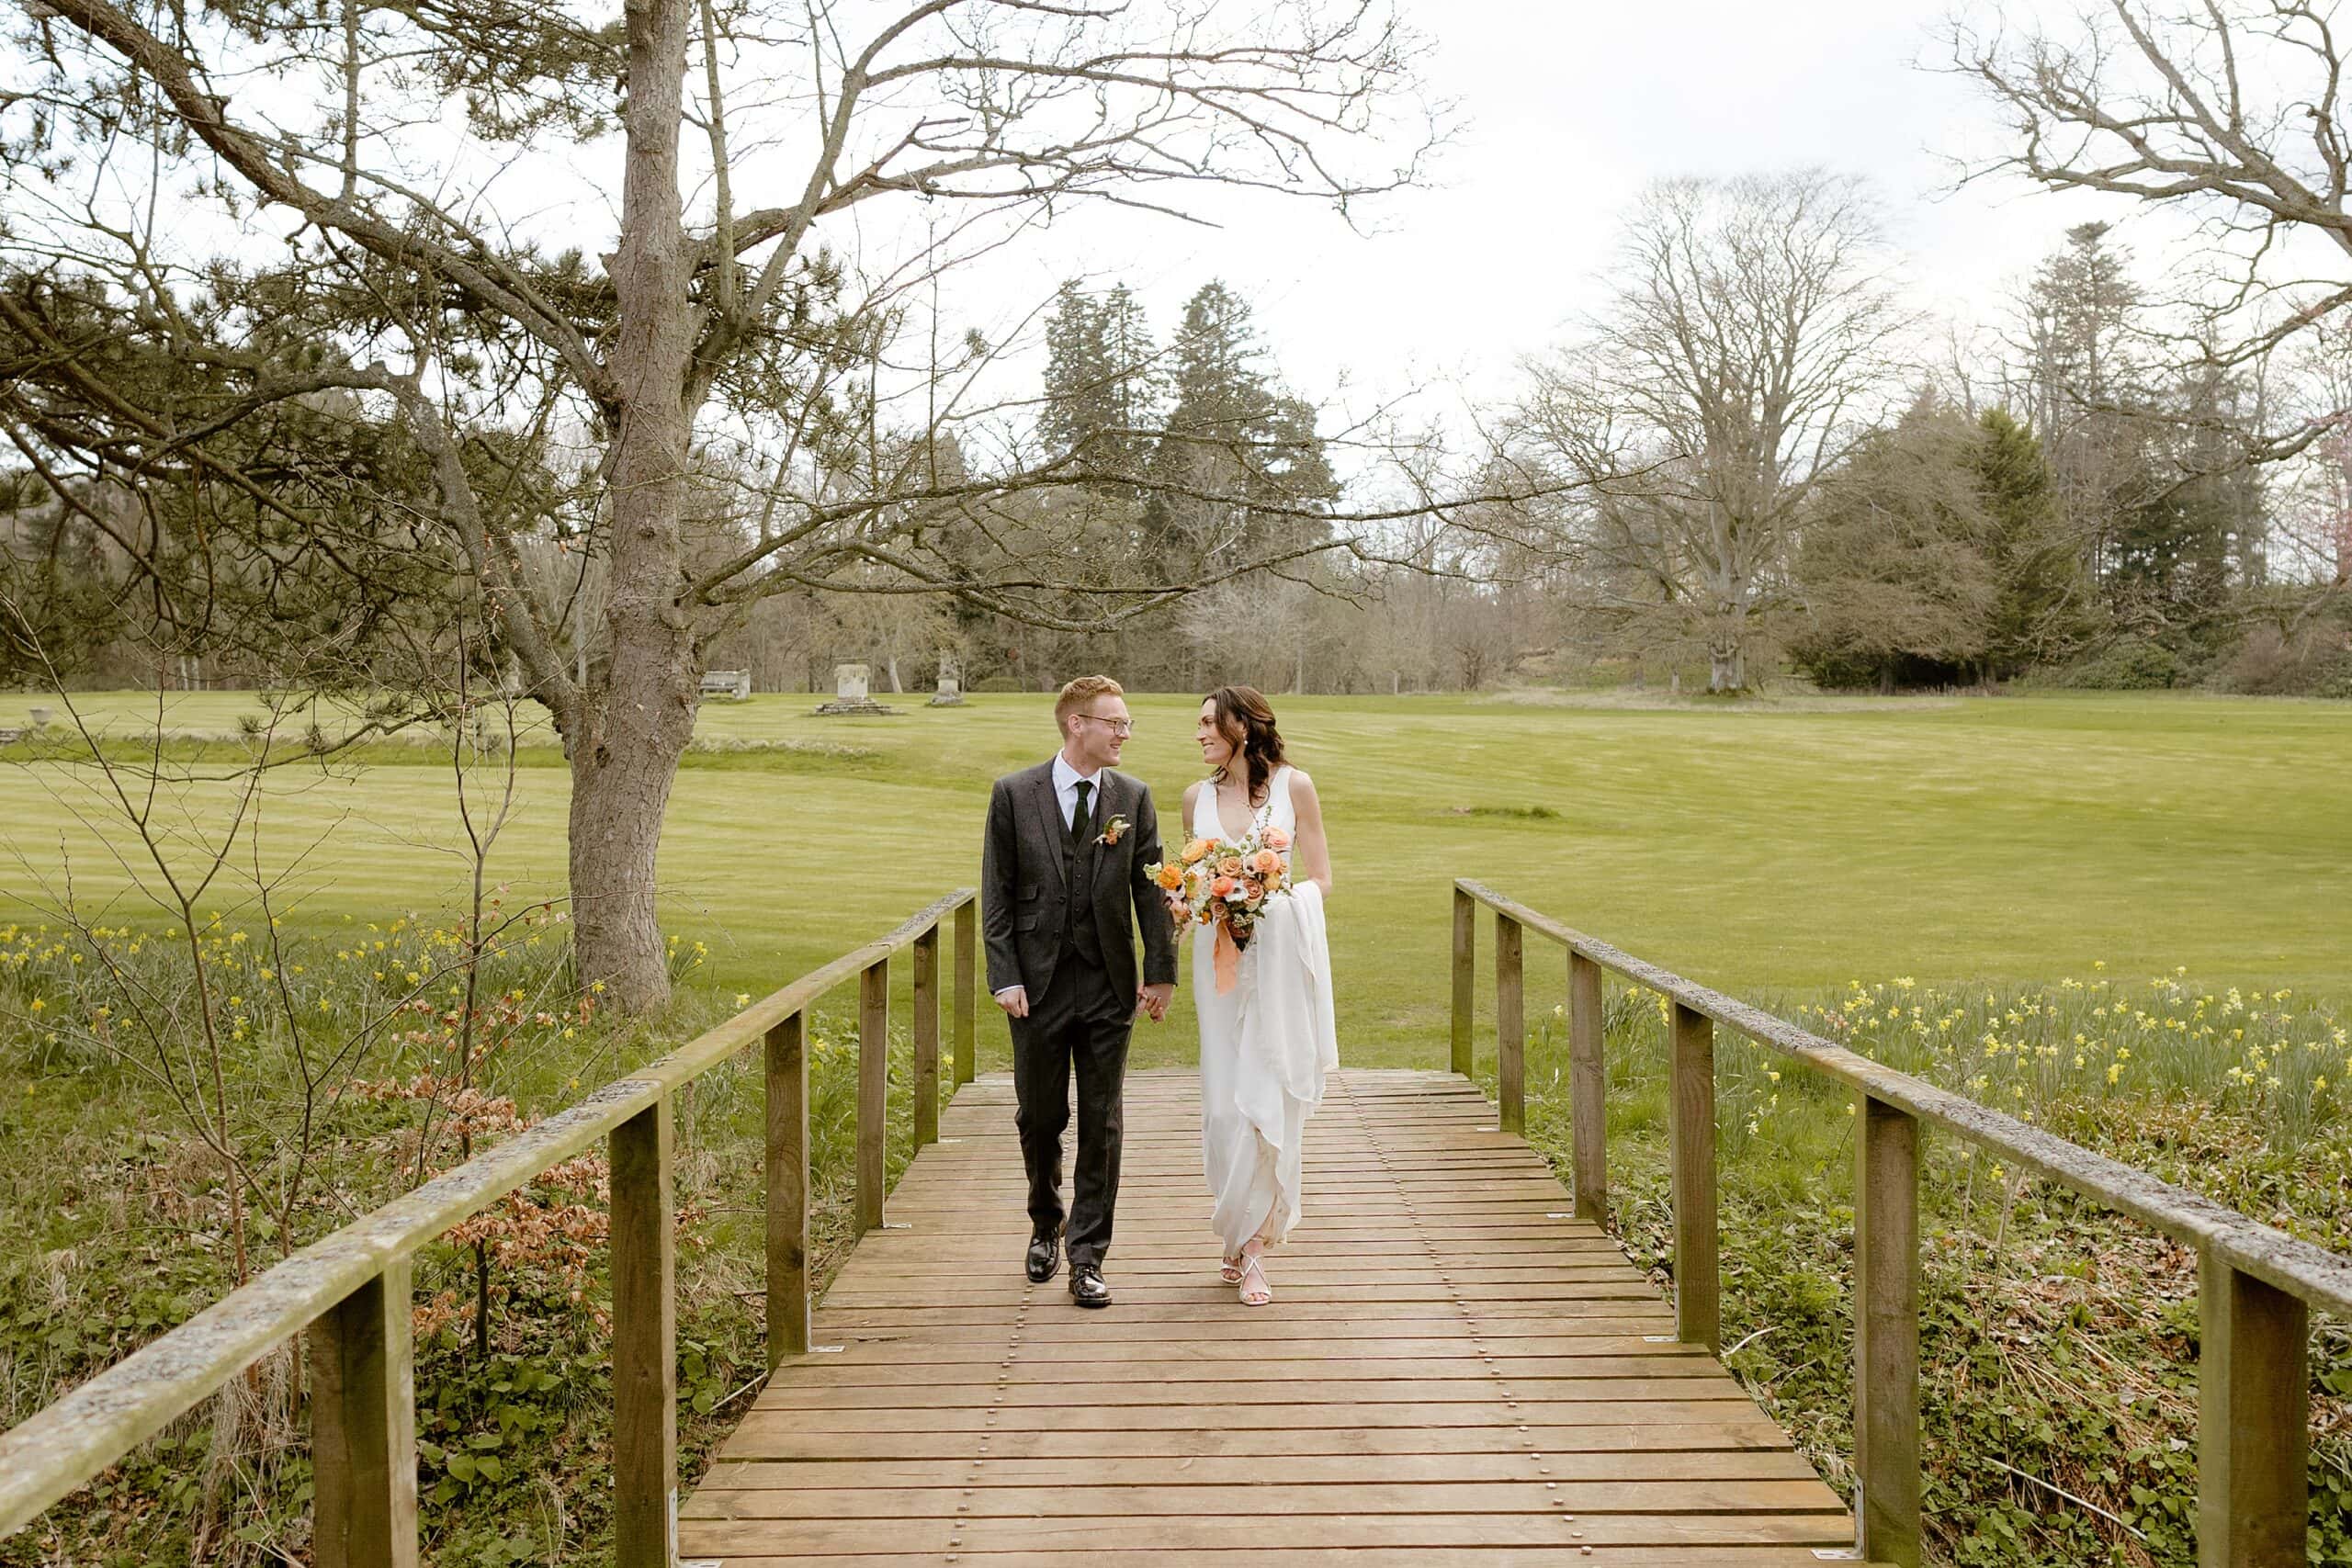 the bride and groom walking across a wooden bridge with lawn and trees in the background following their unusual wedding venues east lothian wedding ceremony near edinburgh scotland